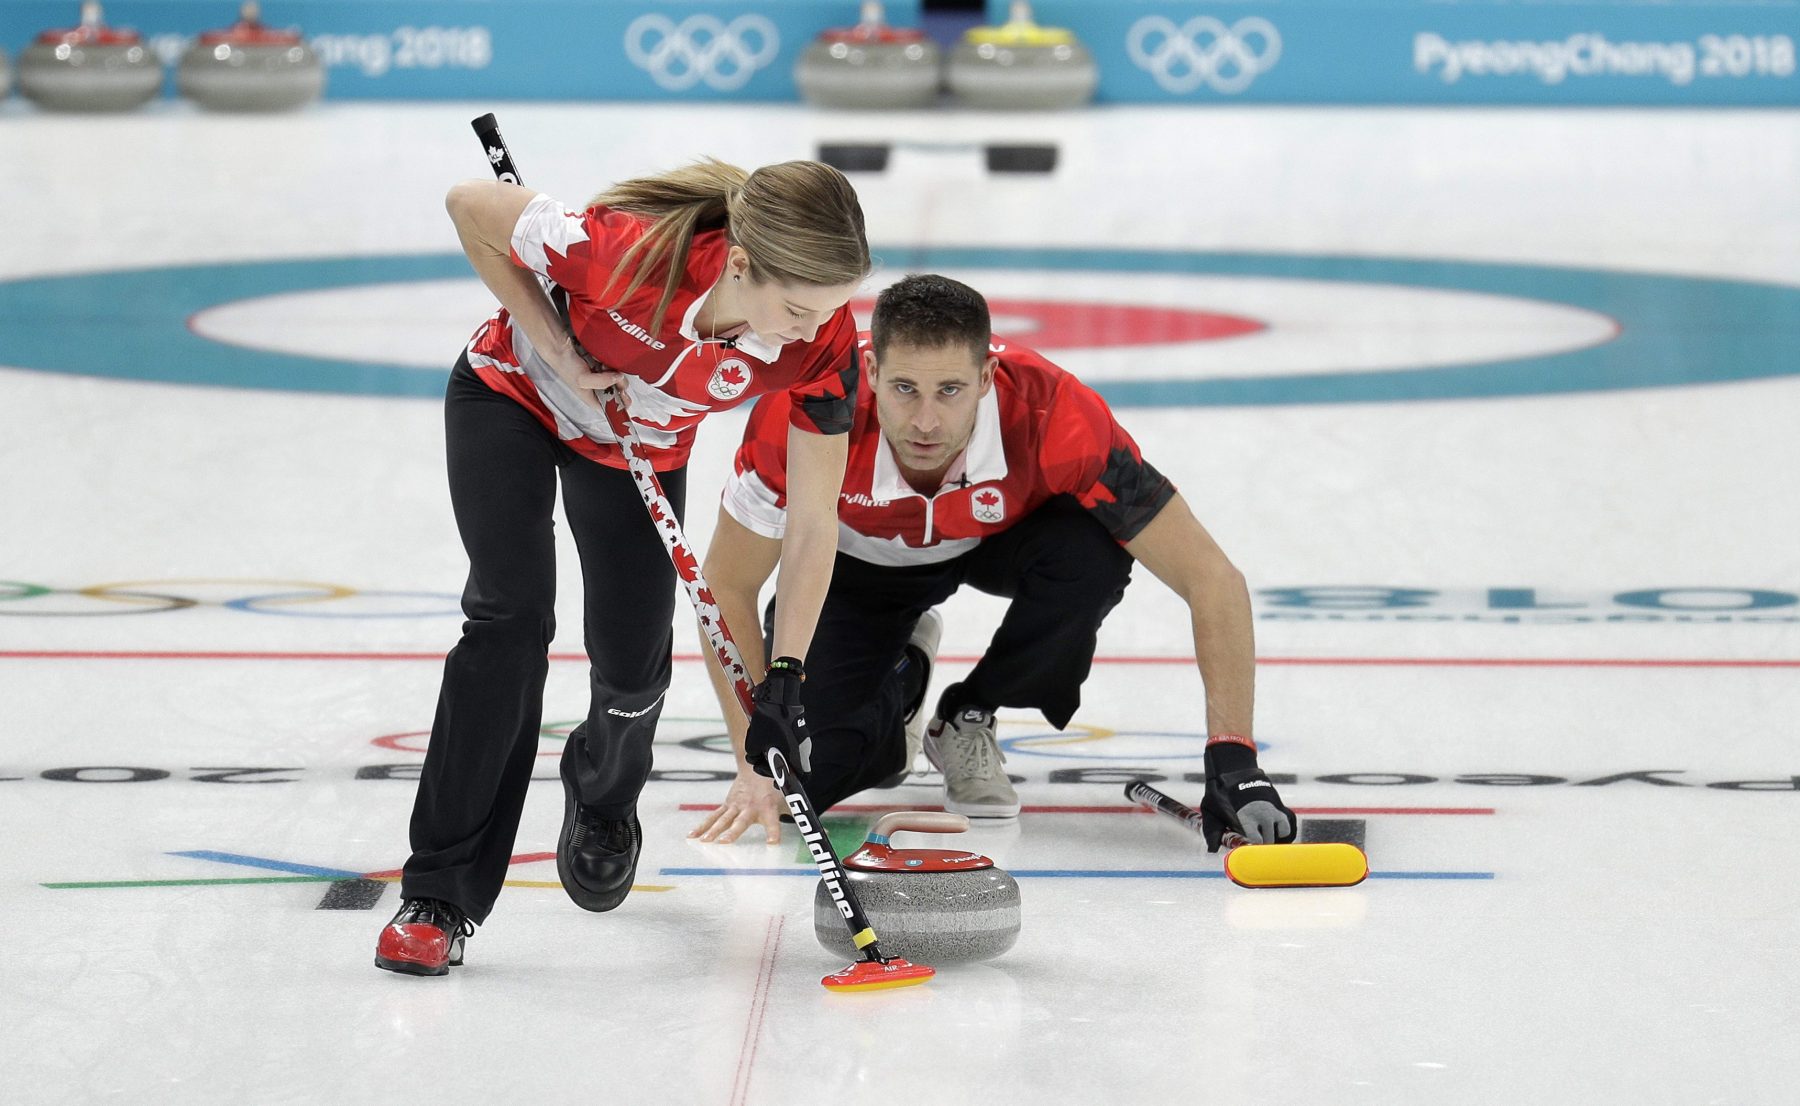 John Morris and Kaitlyn Lawes compete in semifinals at the 2018 Games